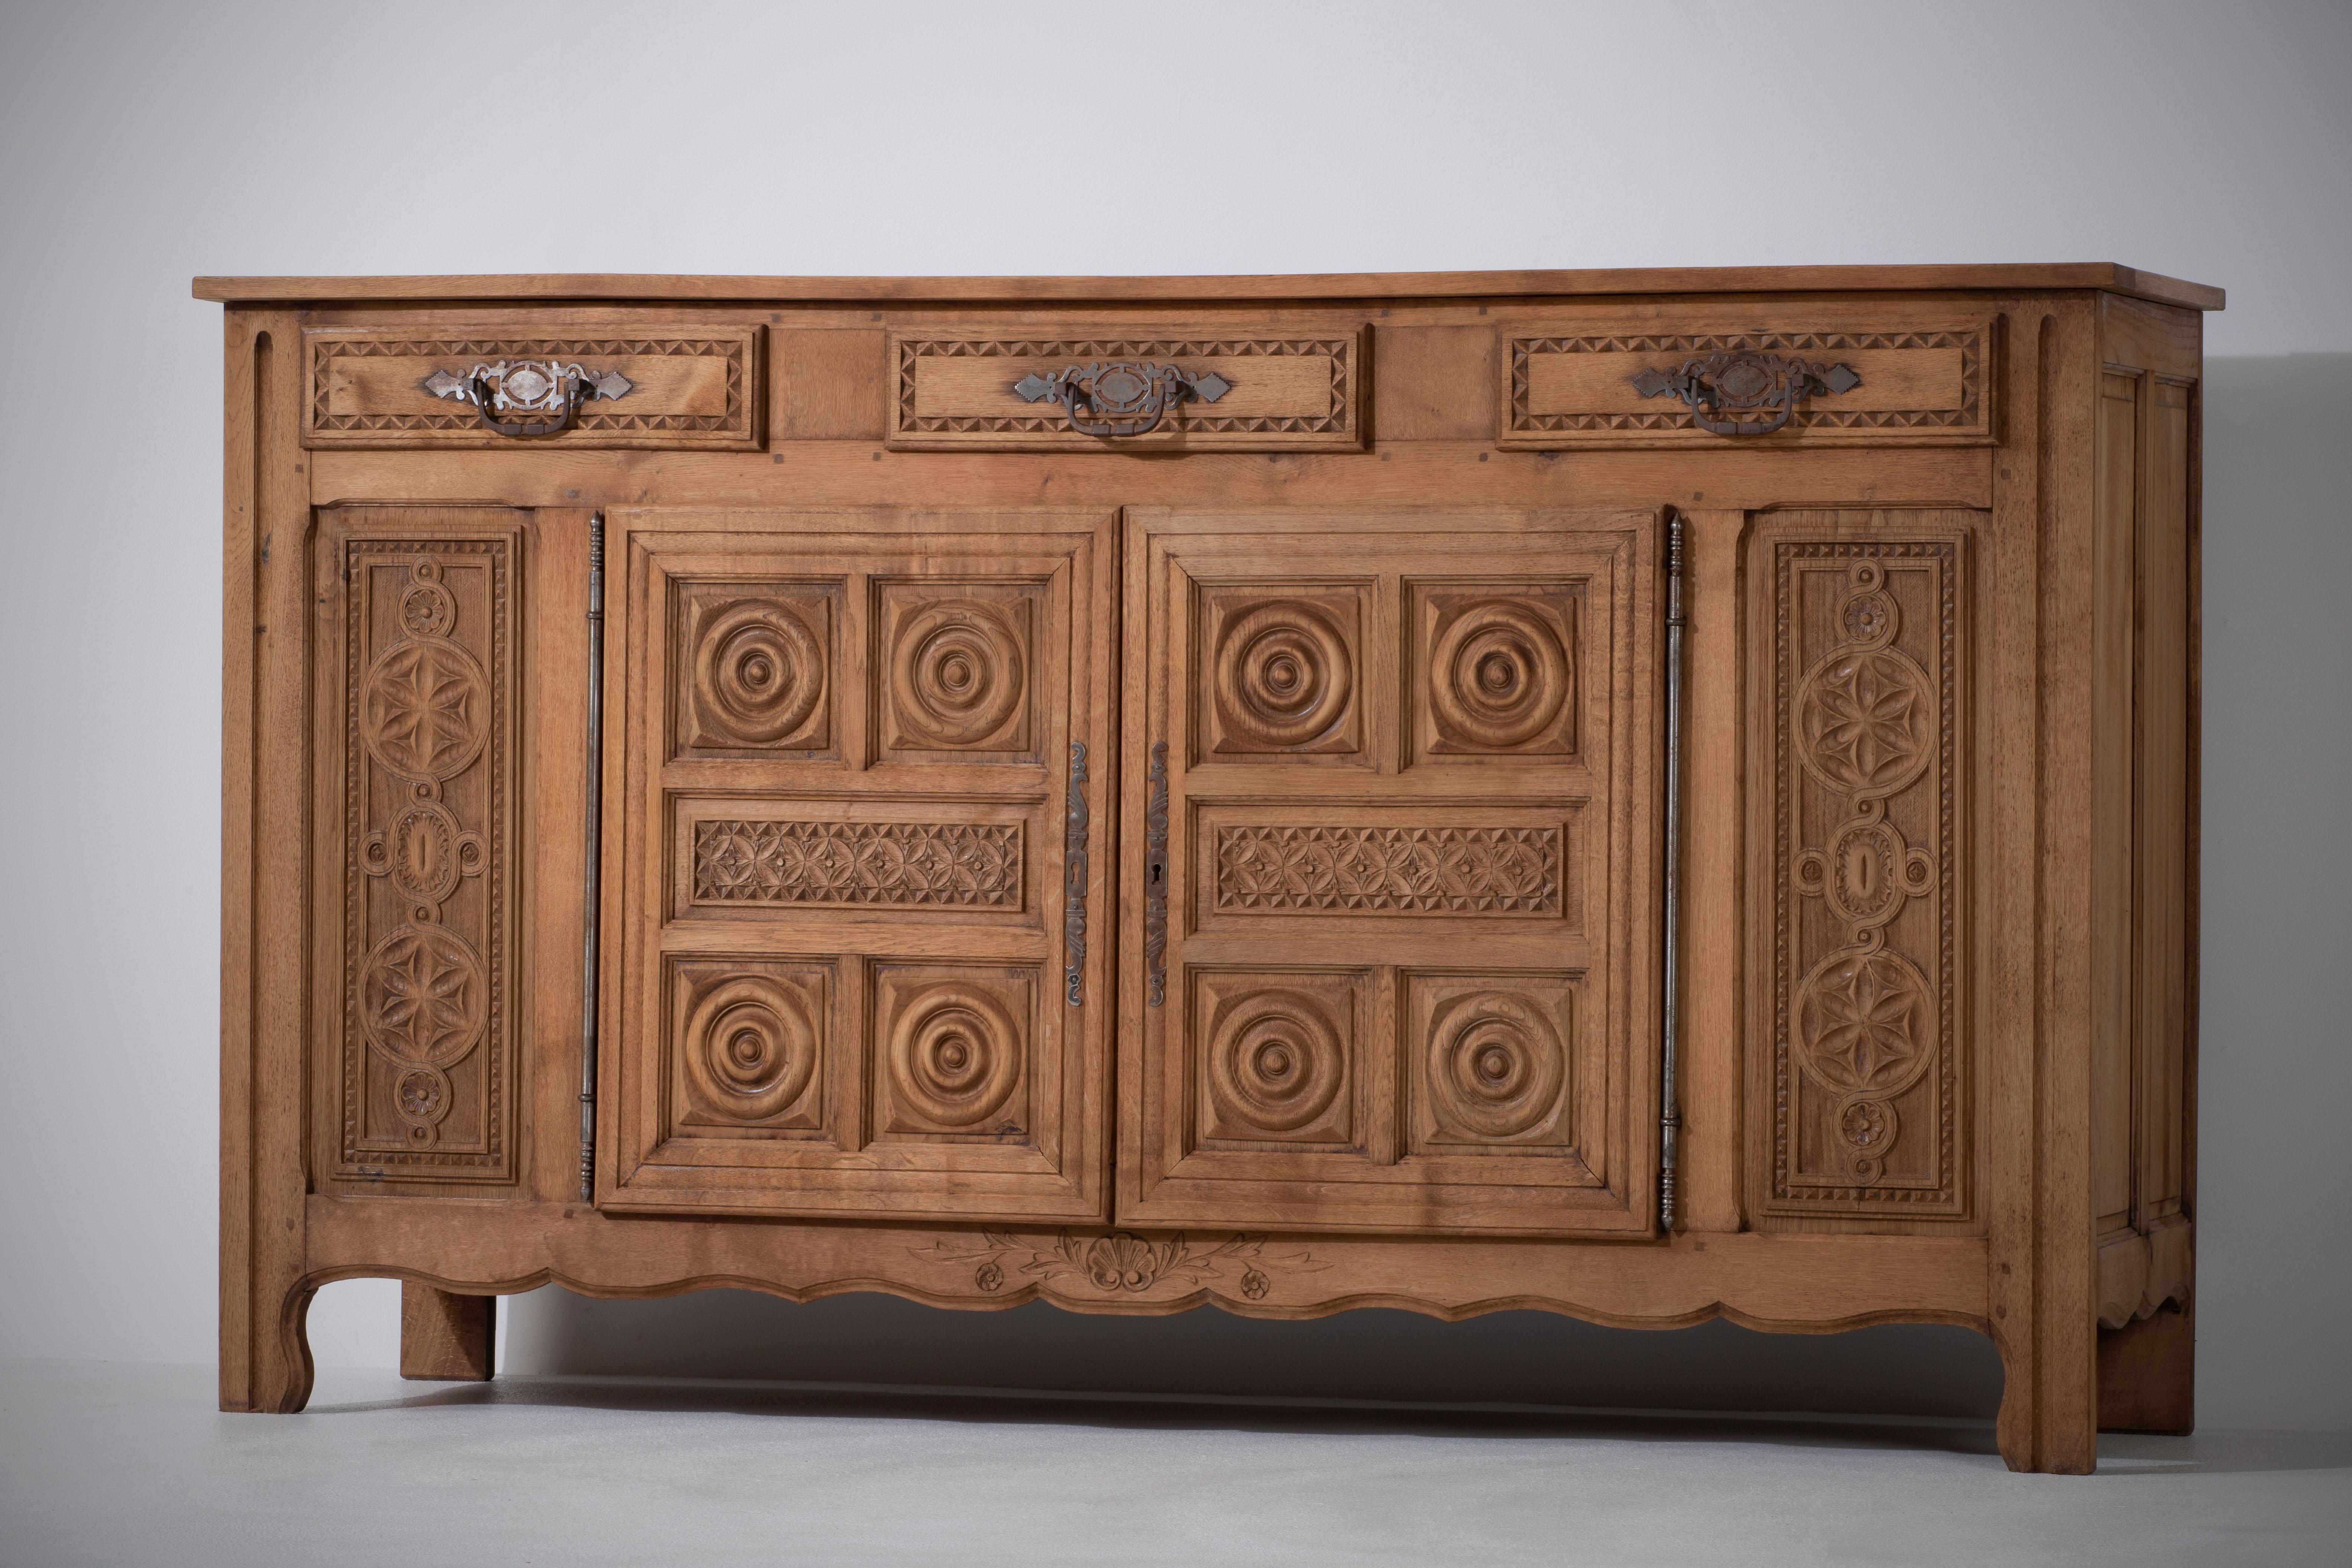 Art Deco Bleached Solid Oak Credenza with Graphic Details, France, 1940s For Sale